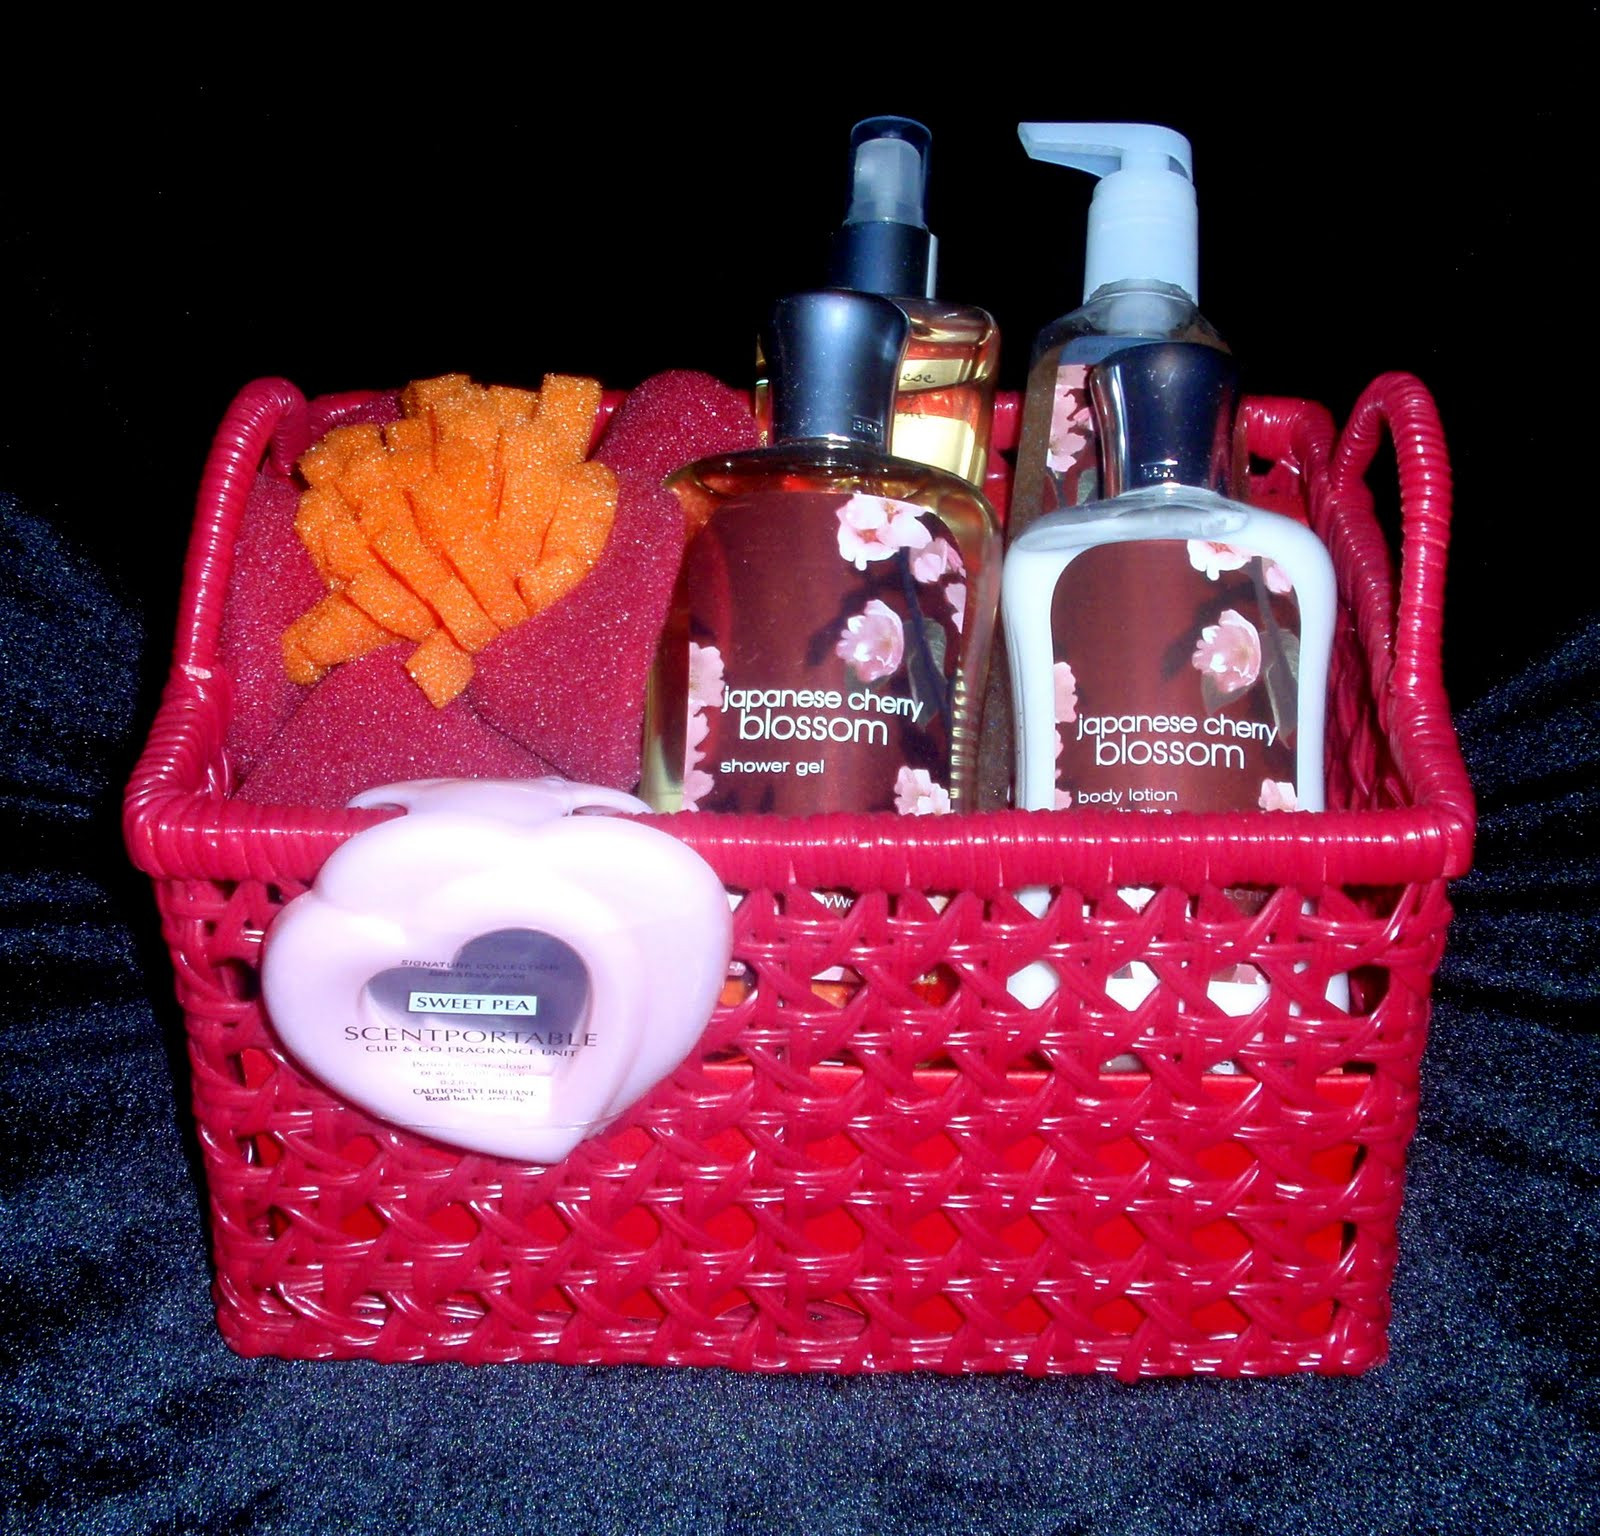 Bath And Body Works Gift Basket Ideas
 Alexander s Auction Japanese Cherry Blossom Gift Basket